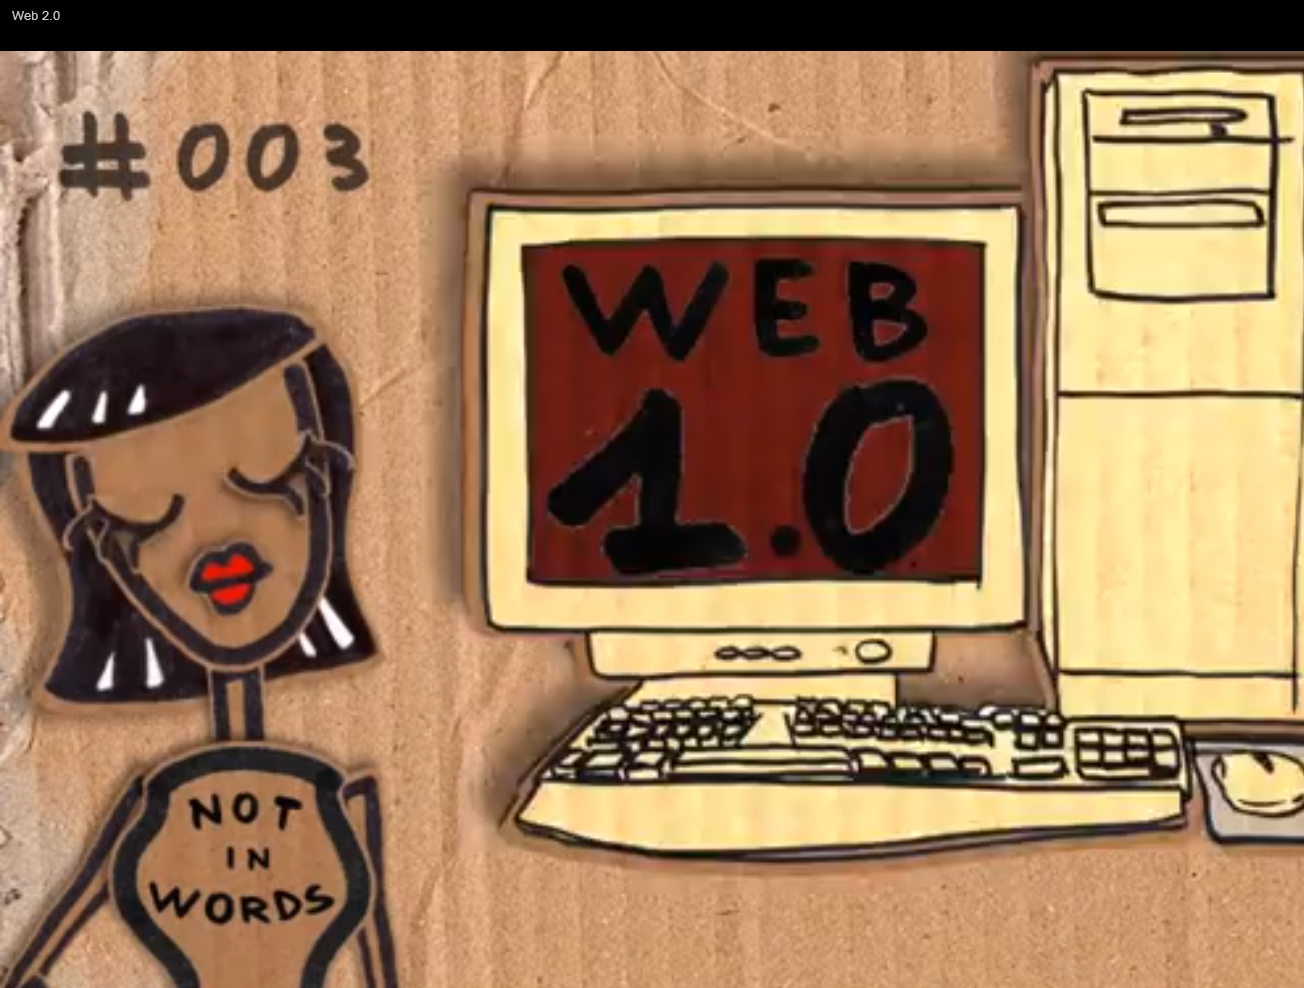 "Web 2.0 Not in Words" by the Not in Words Project